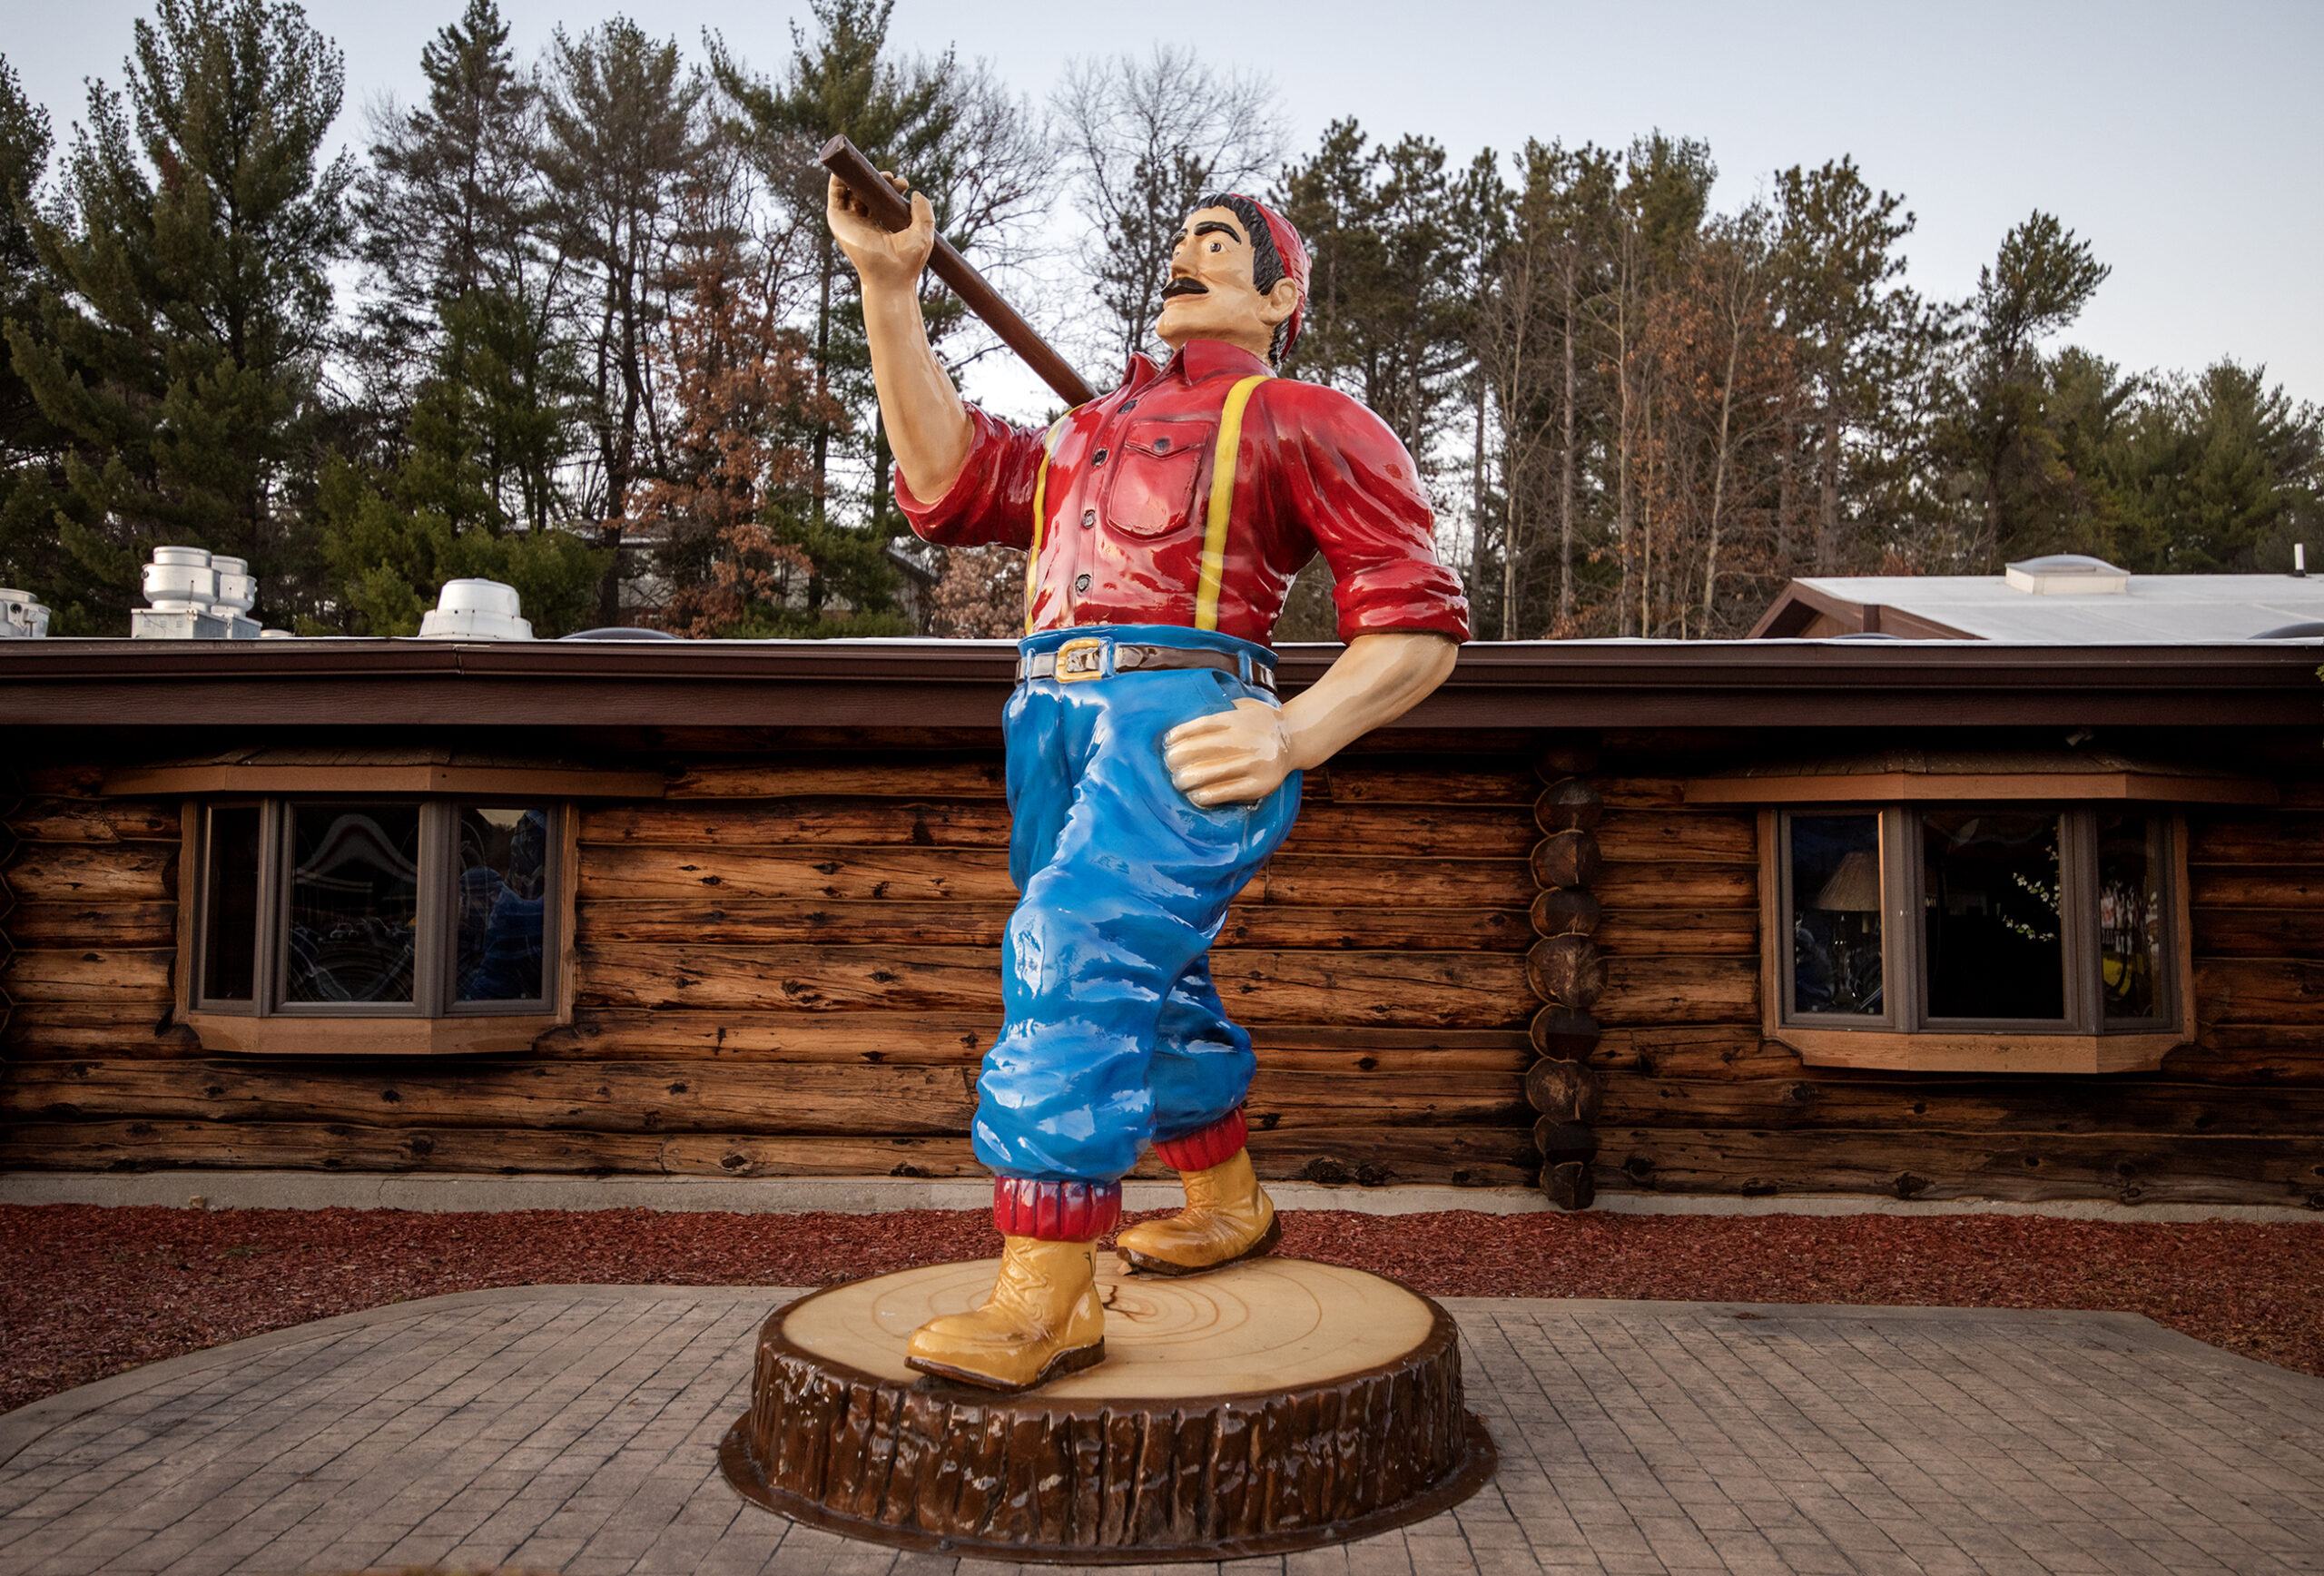 A statue of Paul Bunyan in a red shirt, suspenders, and boots.